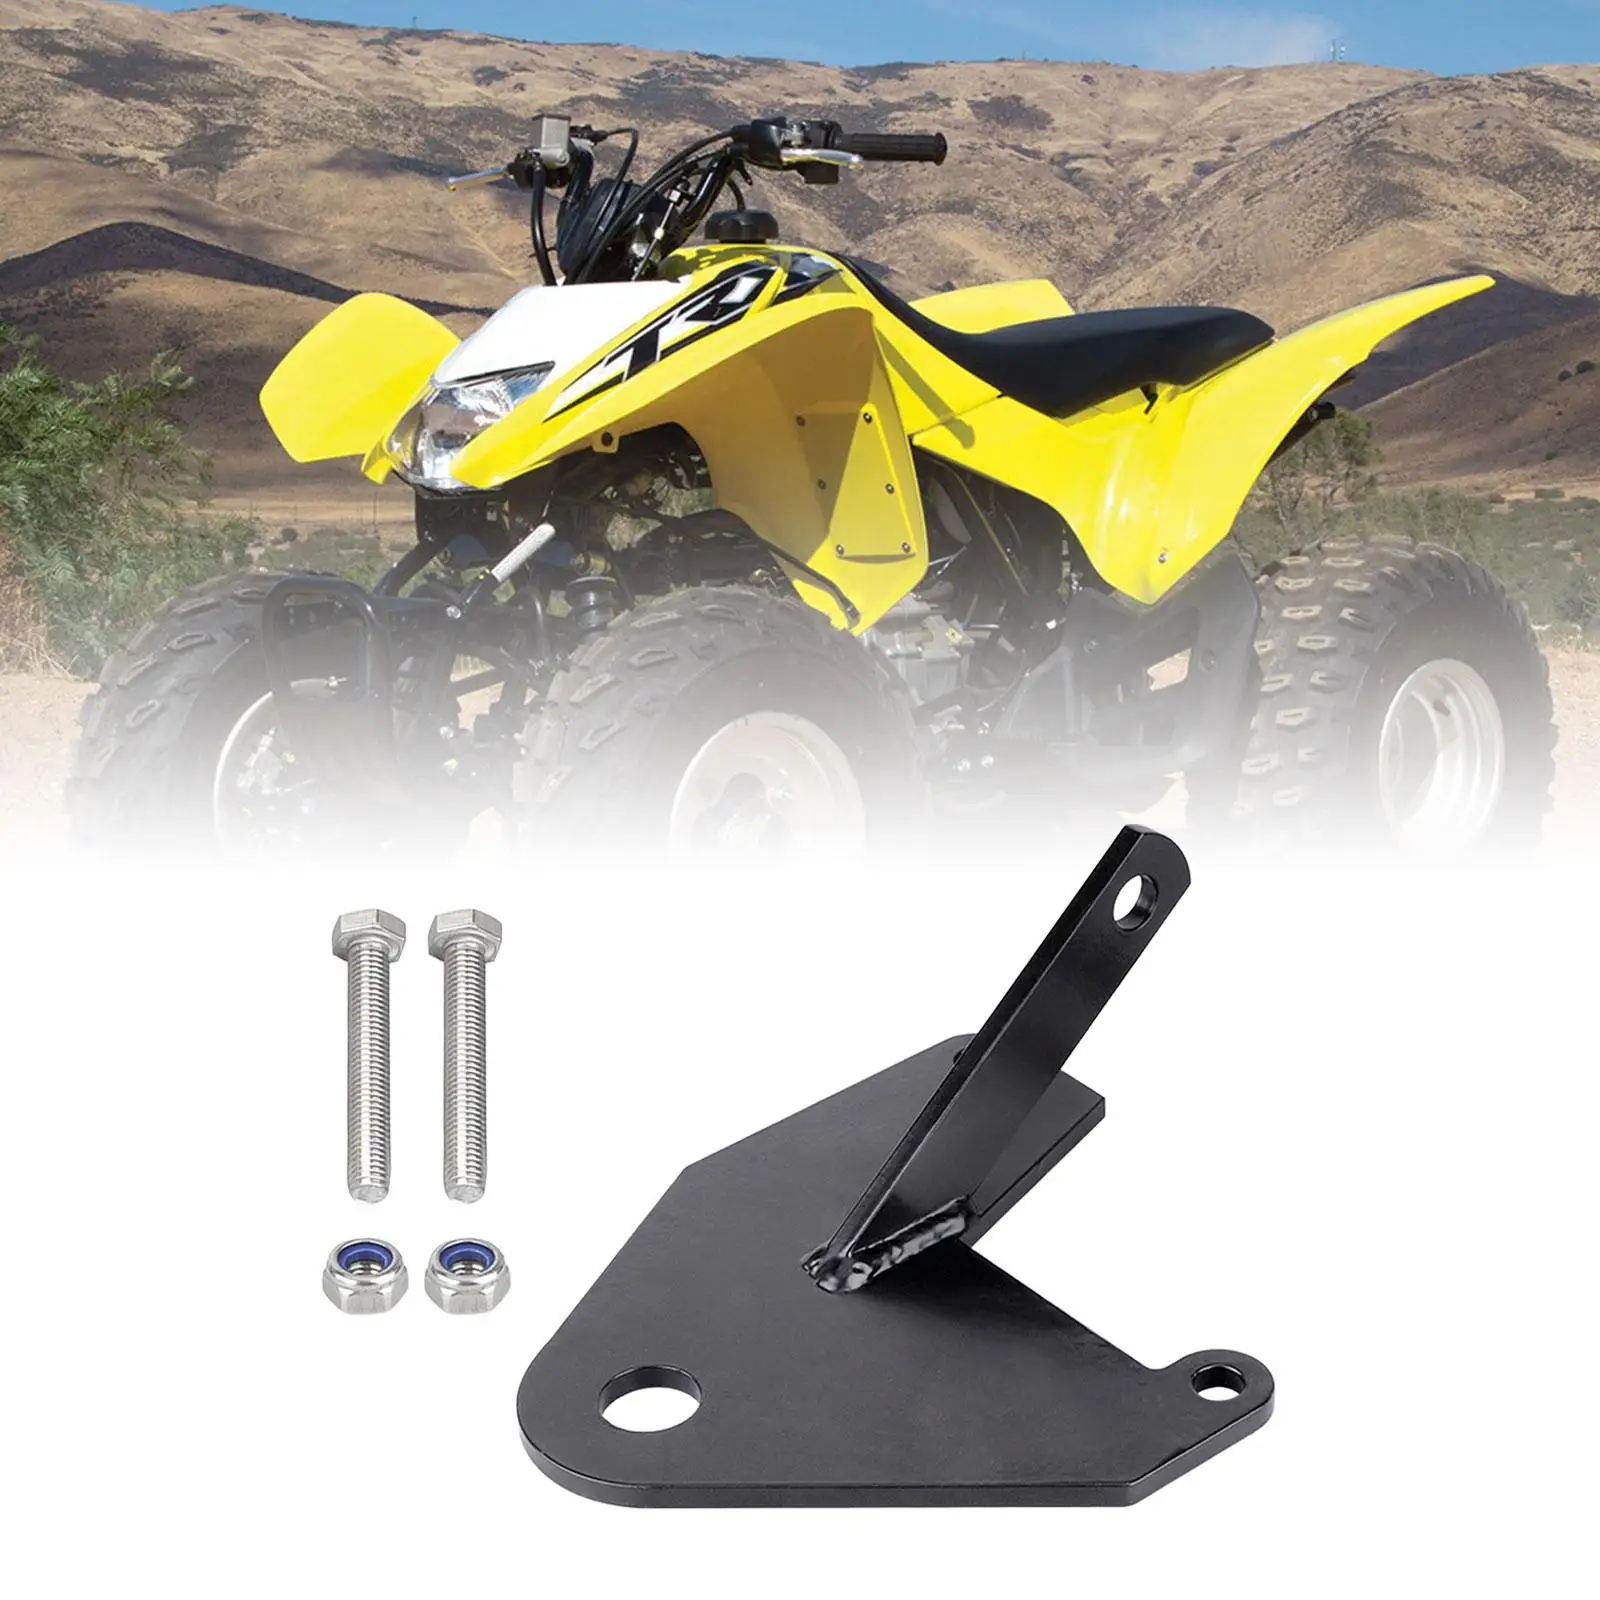 ATV Ball Hitch with Hardware for TRX250 Recon ATV 1997-2017 Replacement